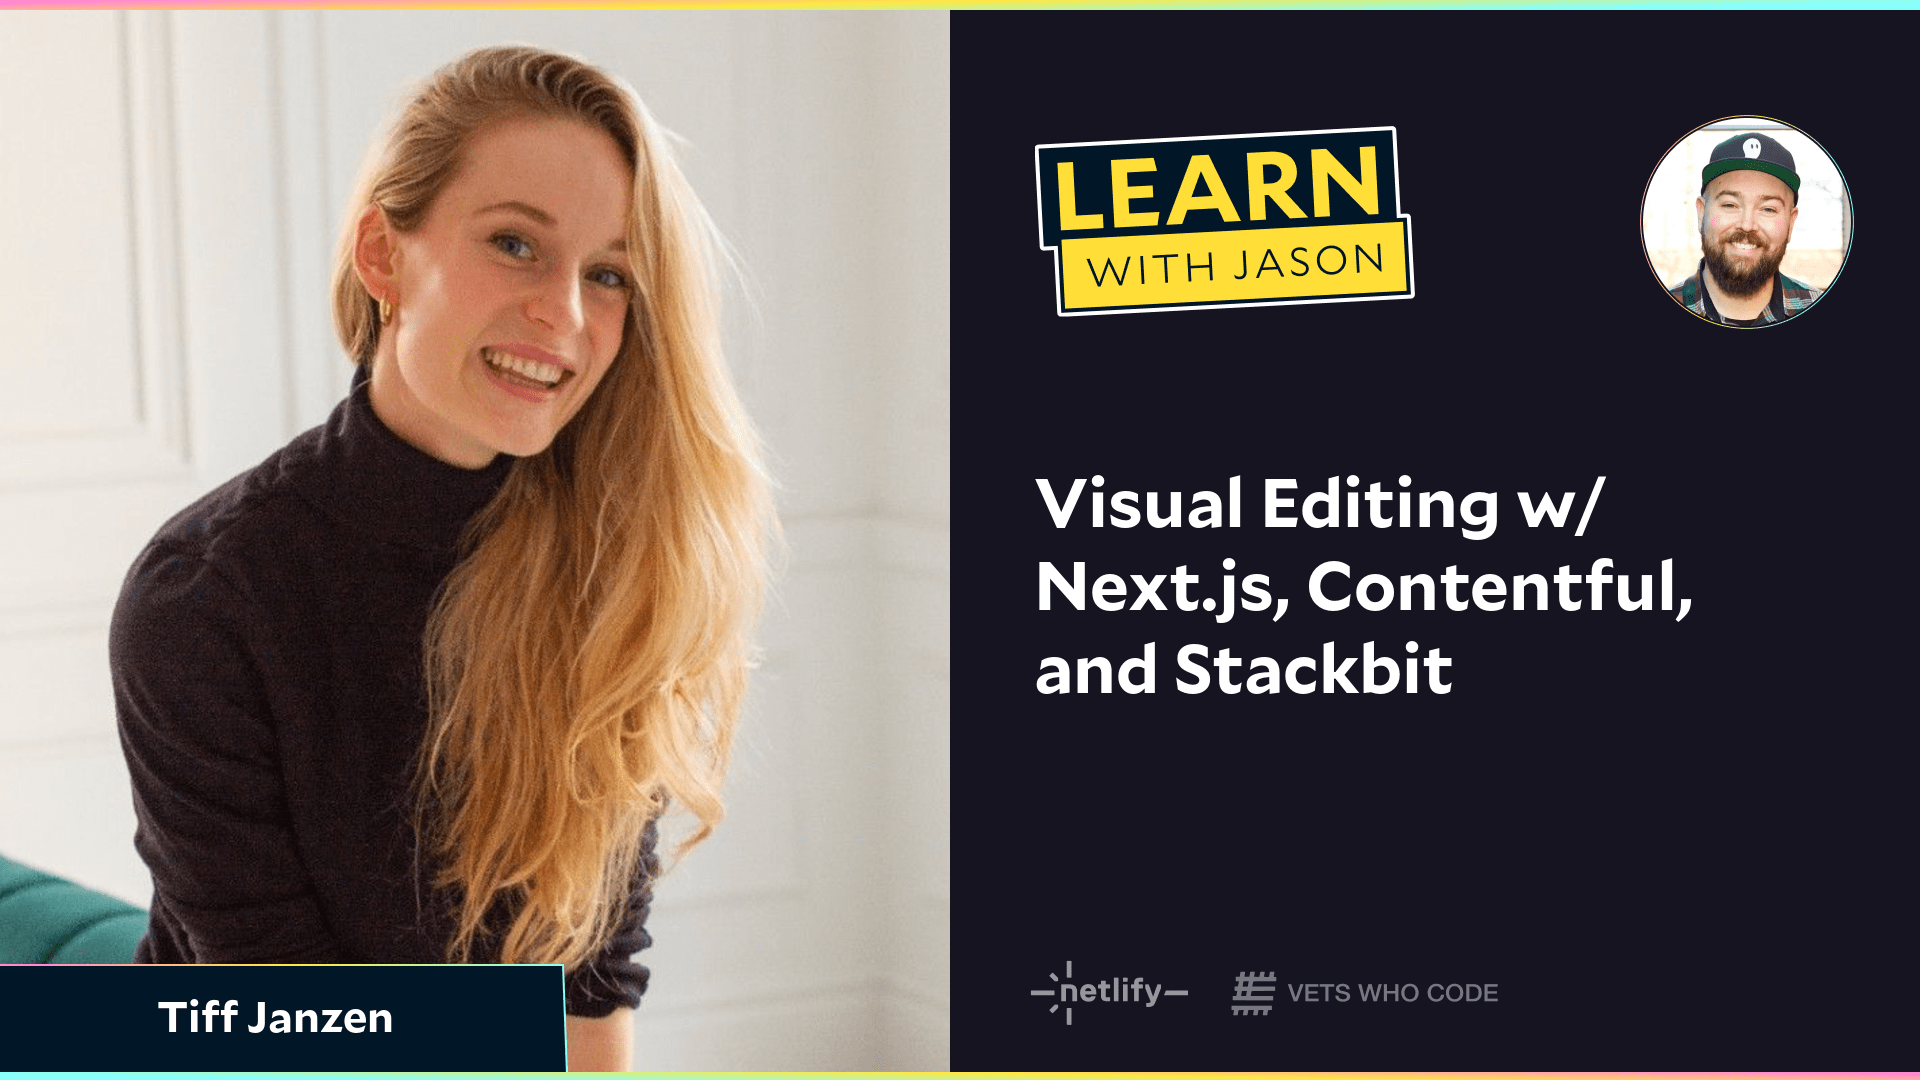 Visual Editing w/Next.js, Contentful, and Stackbit (with Tiff Janzen)